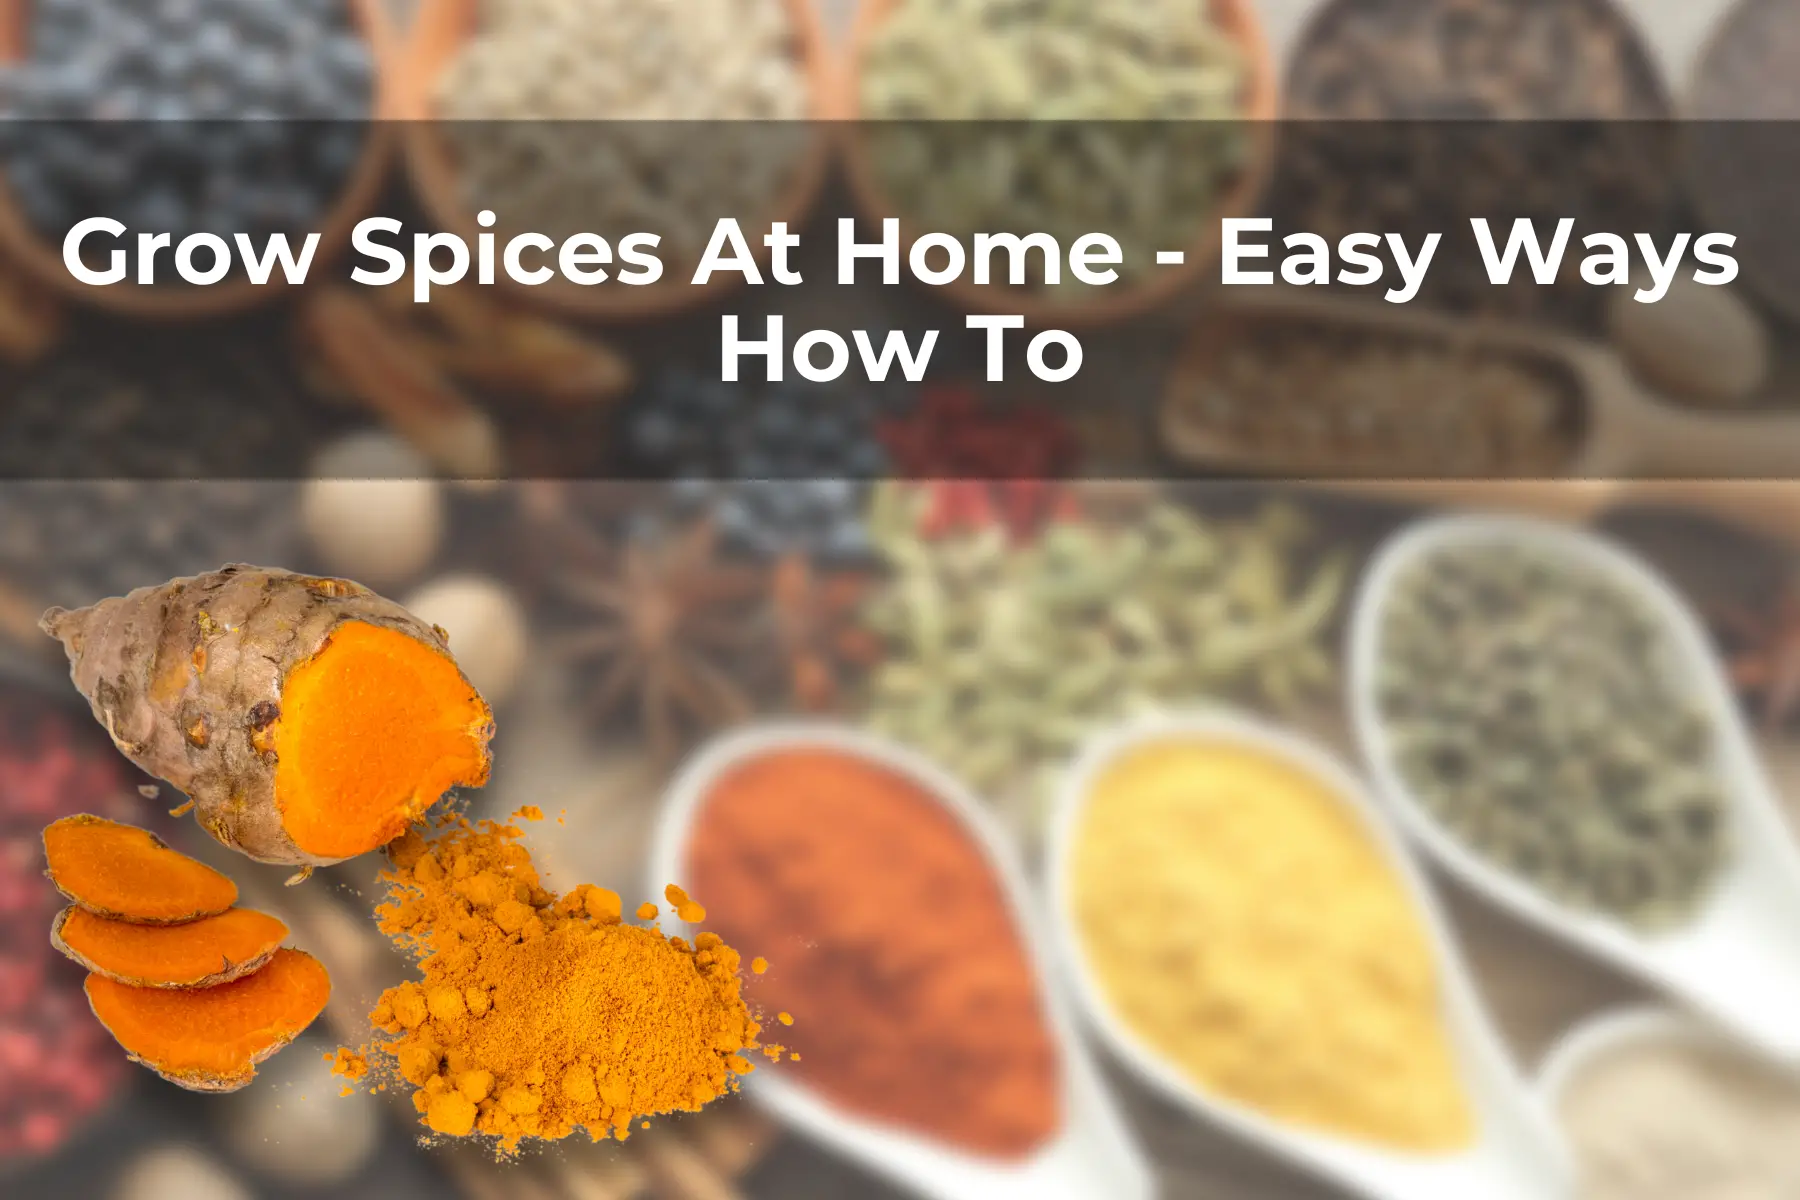 Grow Spices At Home - Easy Ways How To